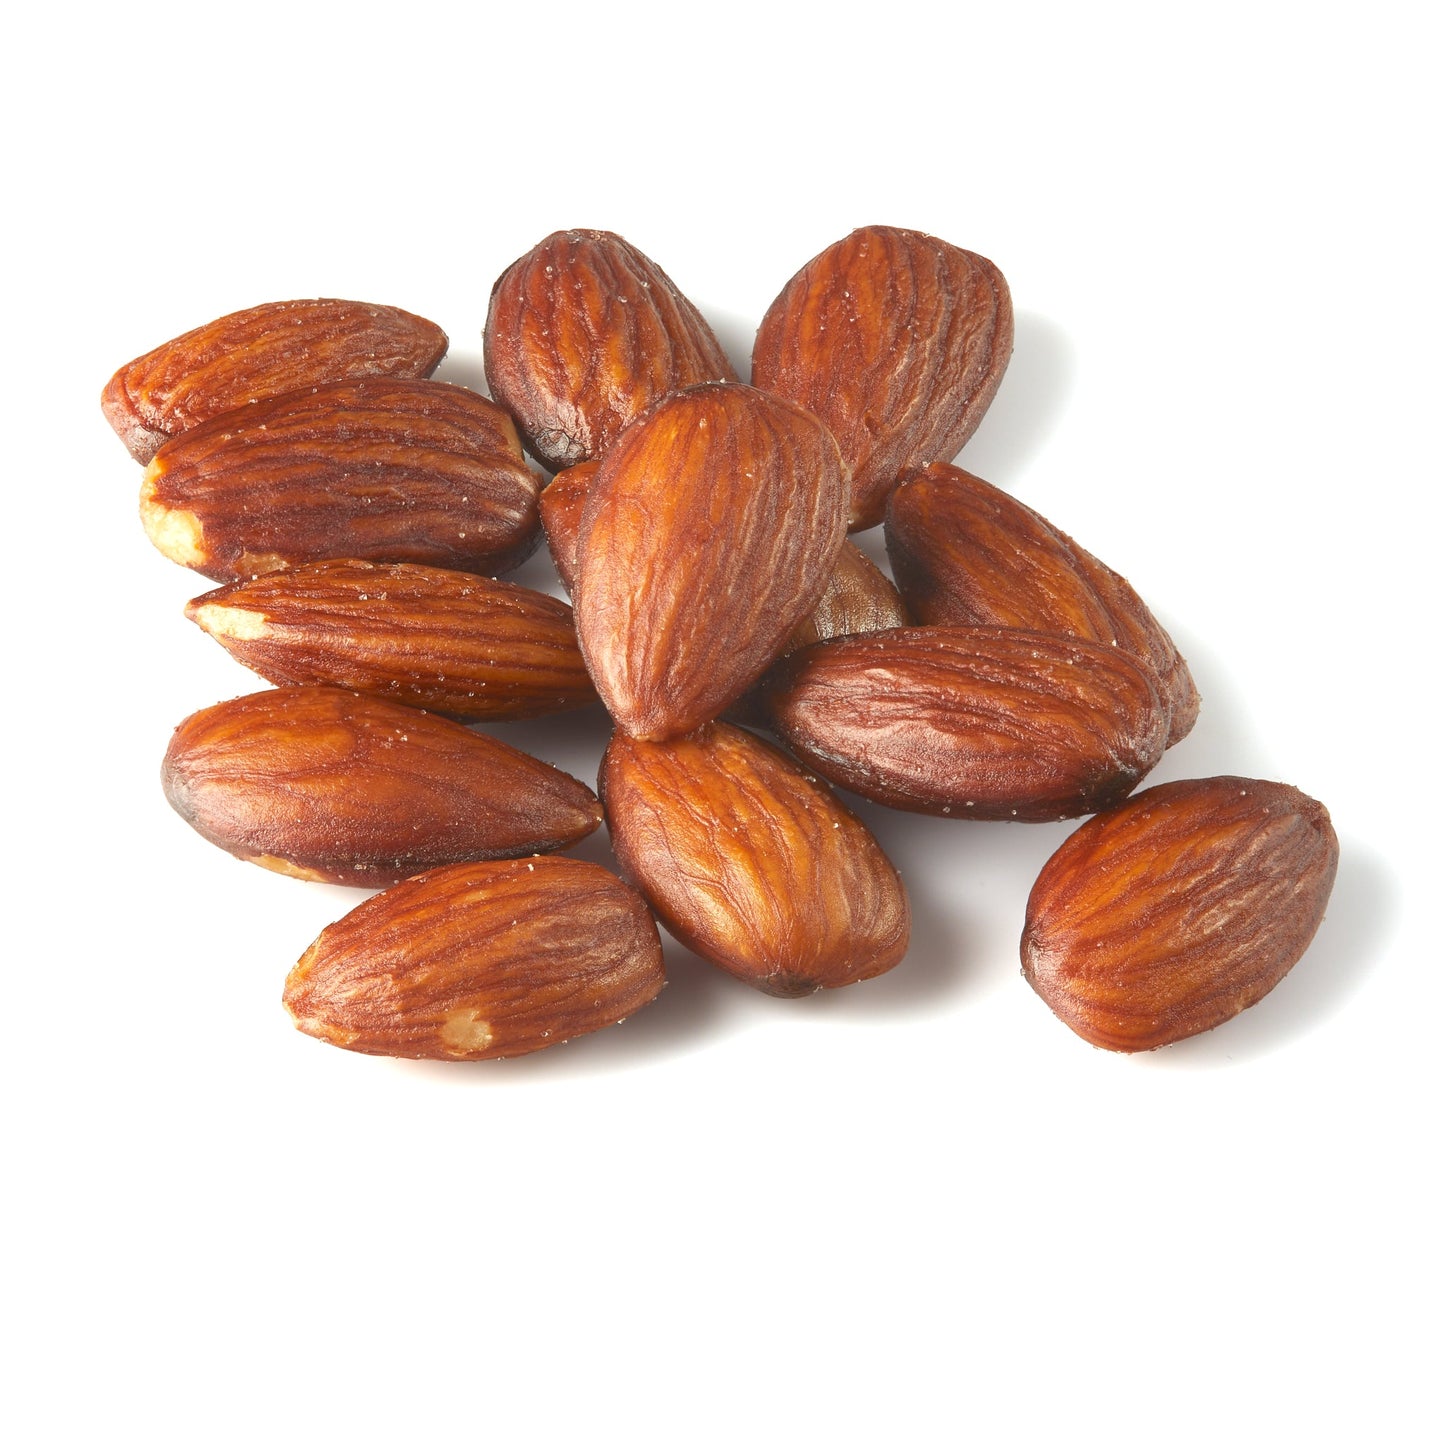 Salted Almonds | Kosher for Passover